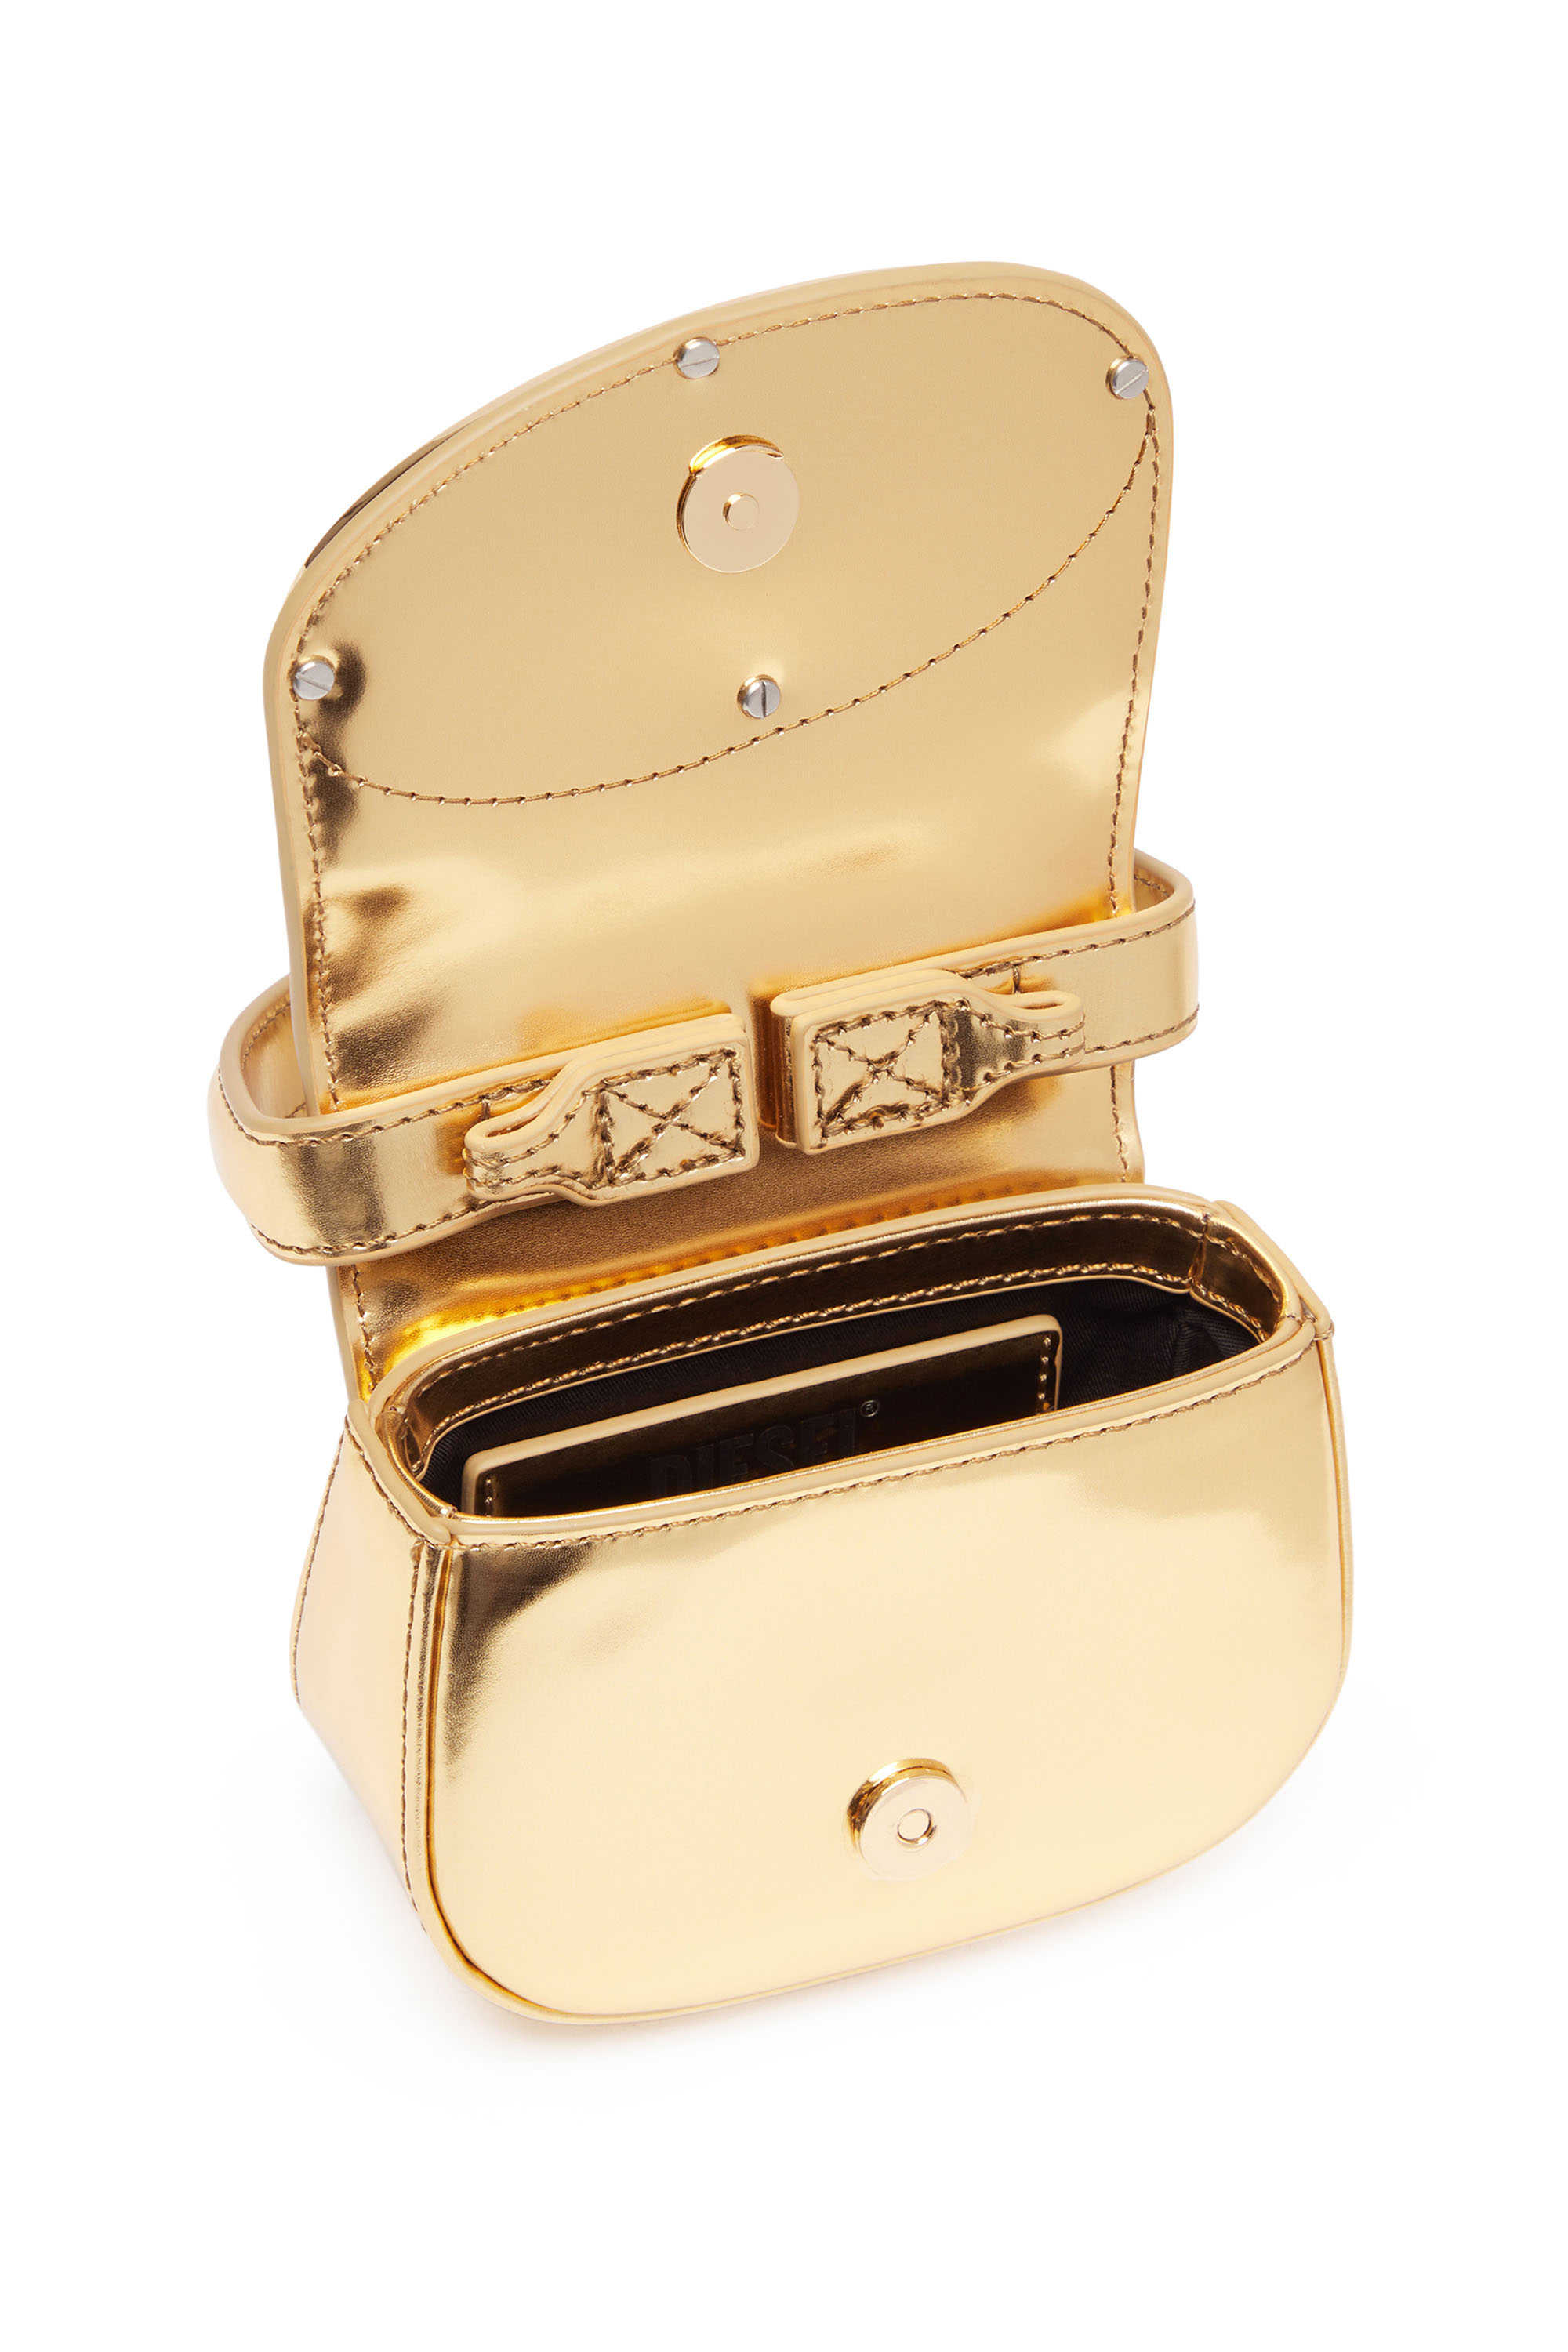 Diesel - 1DR-XS-S, Woman 1DR-XS-S-Iconic mini bag in mirrored leather in Oro - Image 4